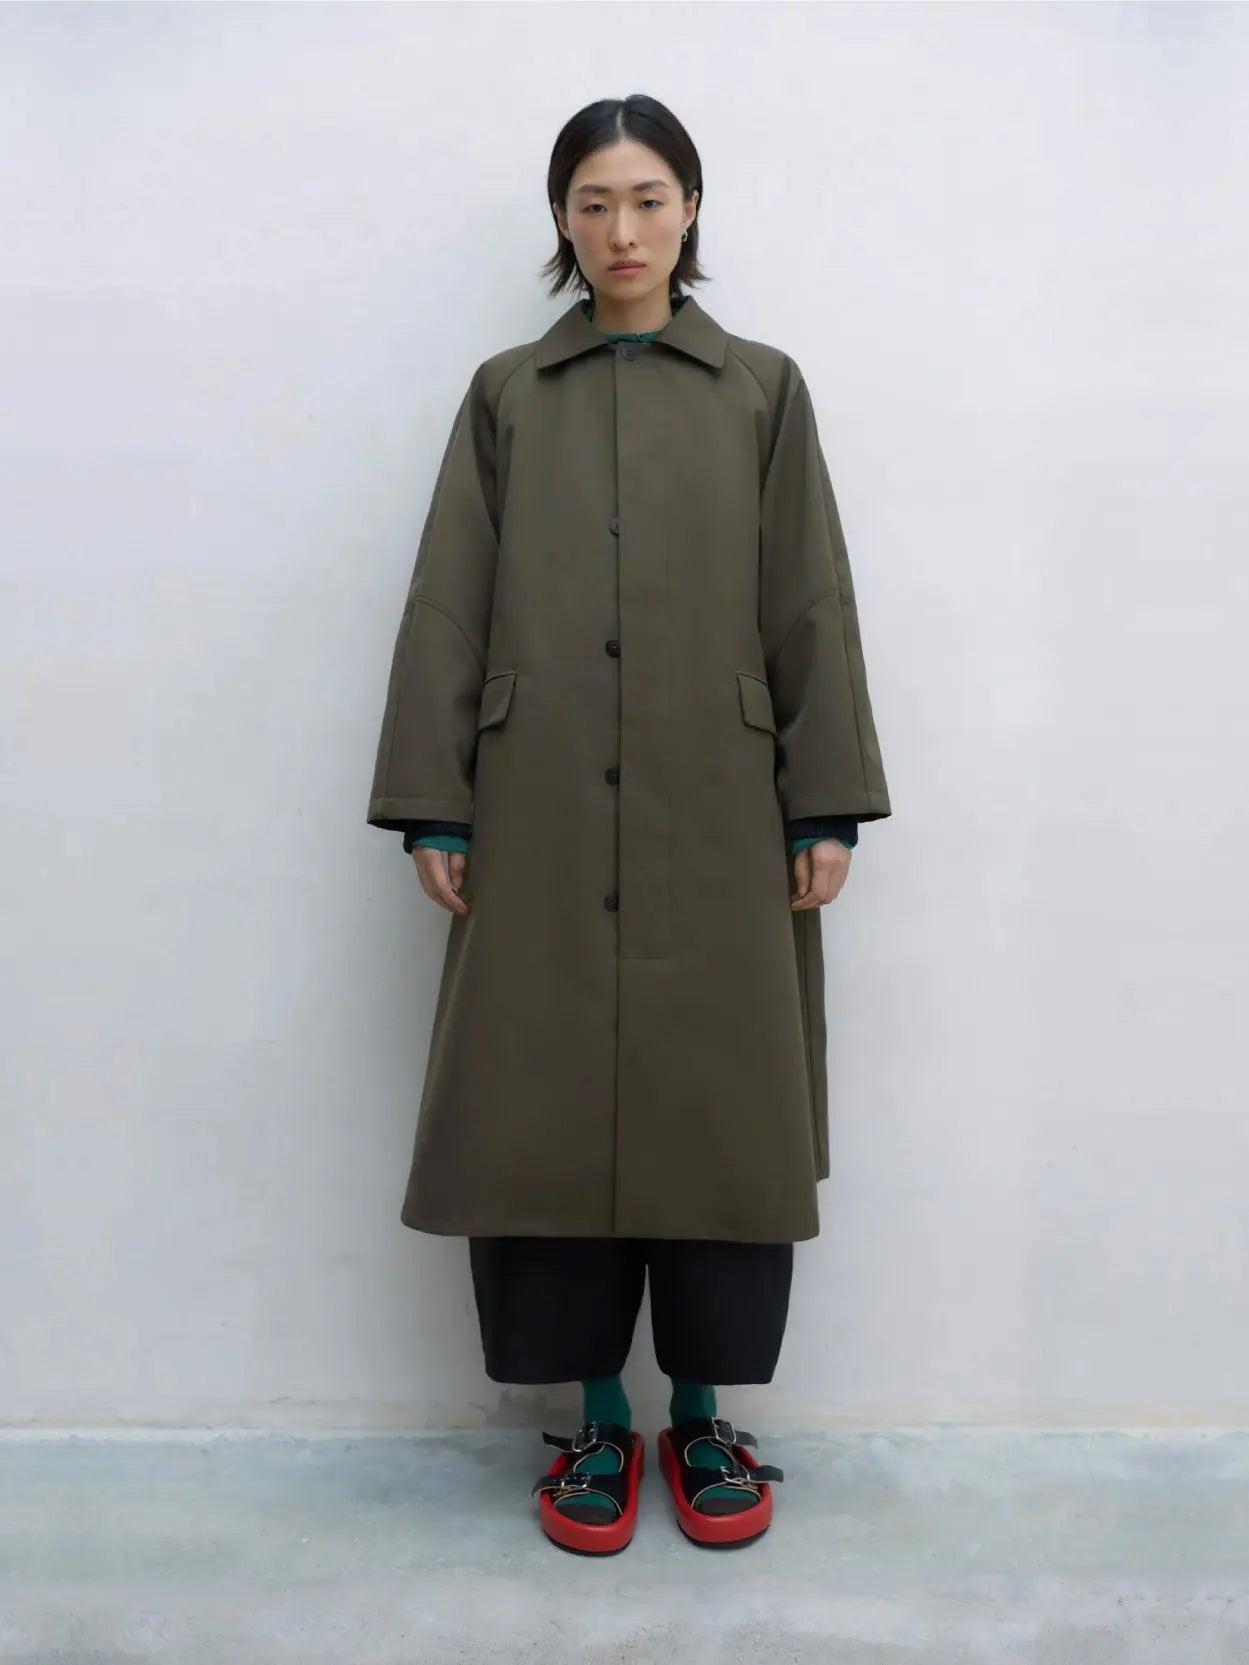 A knee-length, dark green trench coat featuring large front pockets, long sleeves, and a pointed collar. The minimalist design includes a concealed button closure and a plain back, creating a sleek and timeless look. Available at the Barcelona-based store "Bassalstore," the label "Cordera" is visible inside the collar.